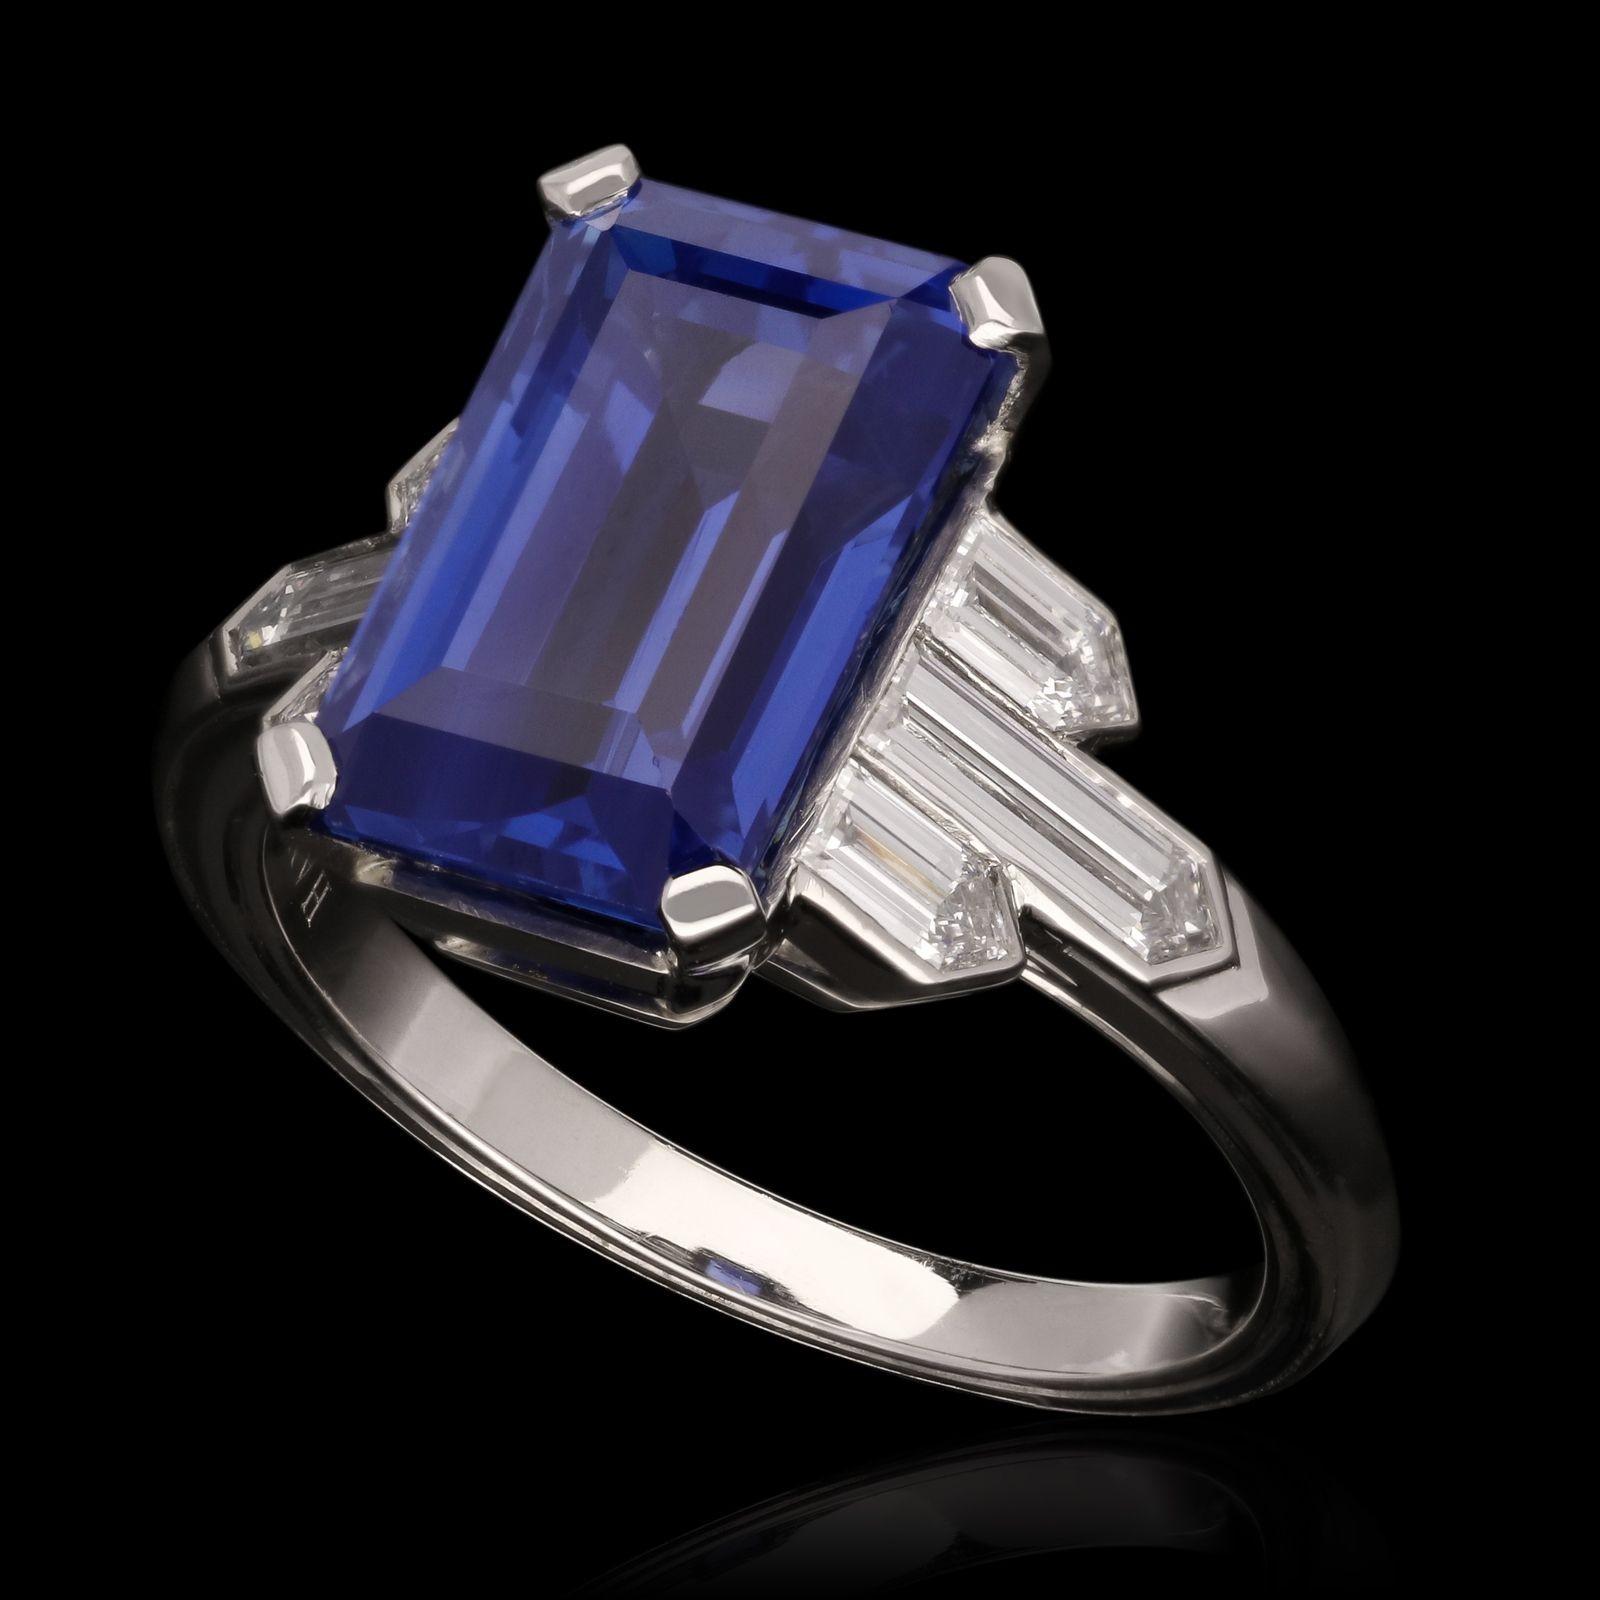 A beautiful sapphire and diamond ring by Hancocks, centred with an emerald-cut unheated Ceylon sapphire weighing 6.19cts and corner claw set between shoulders of three bullet cut diamonds in rub over settings, all in a finely crafted platinum mount